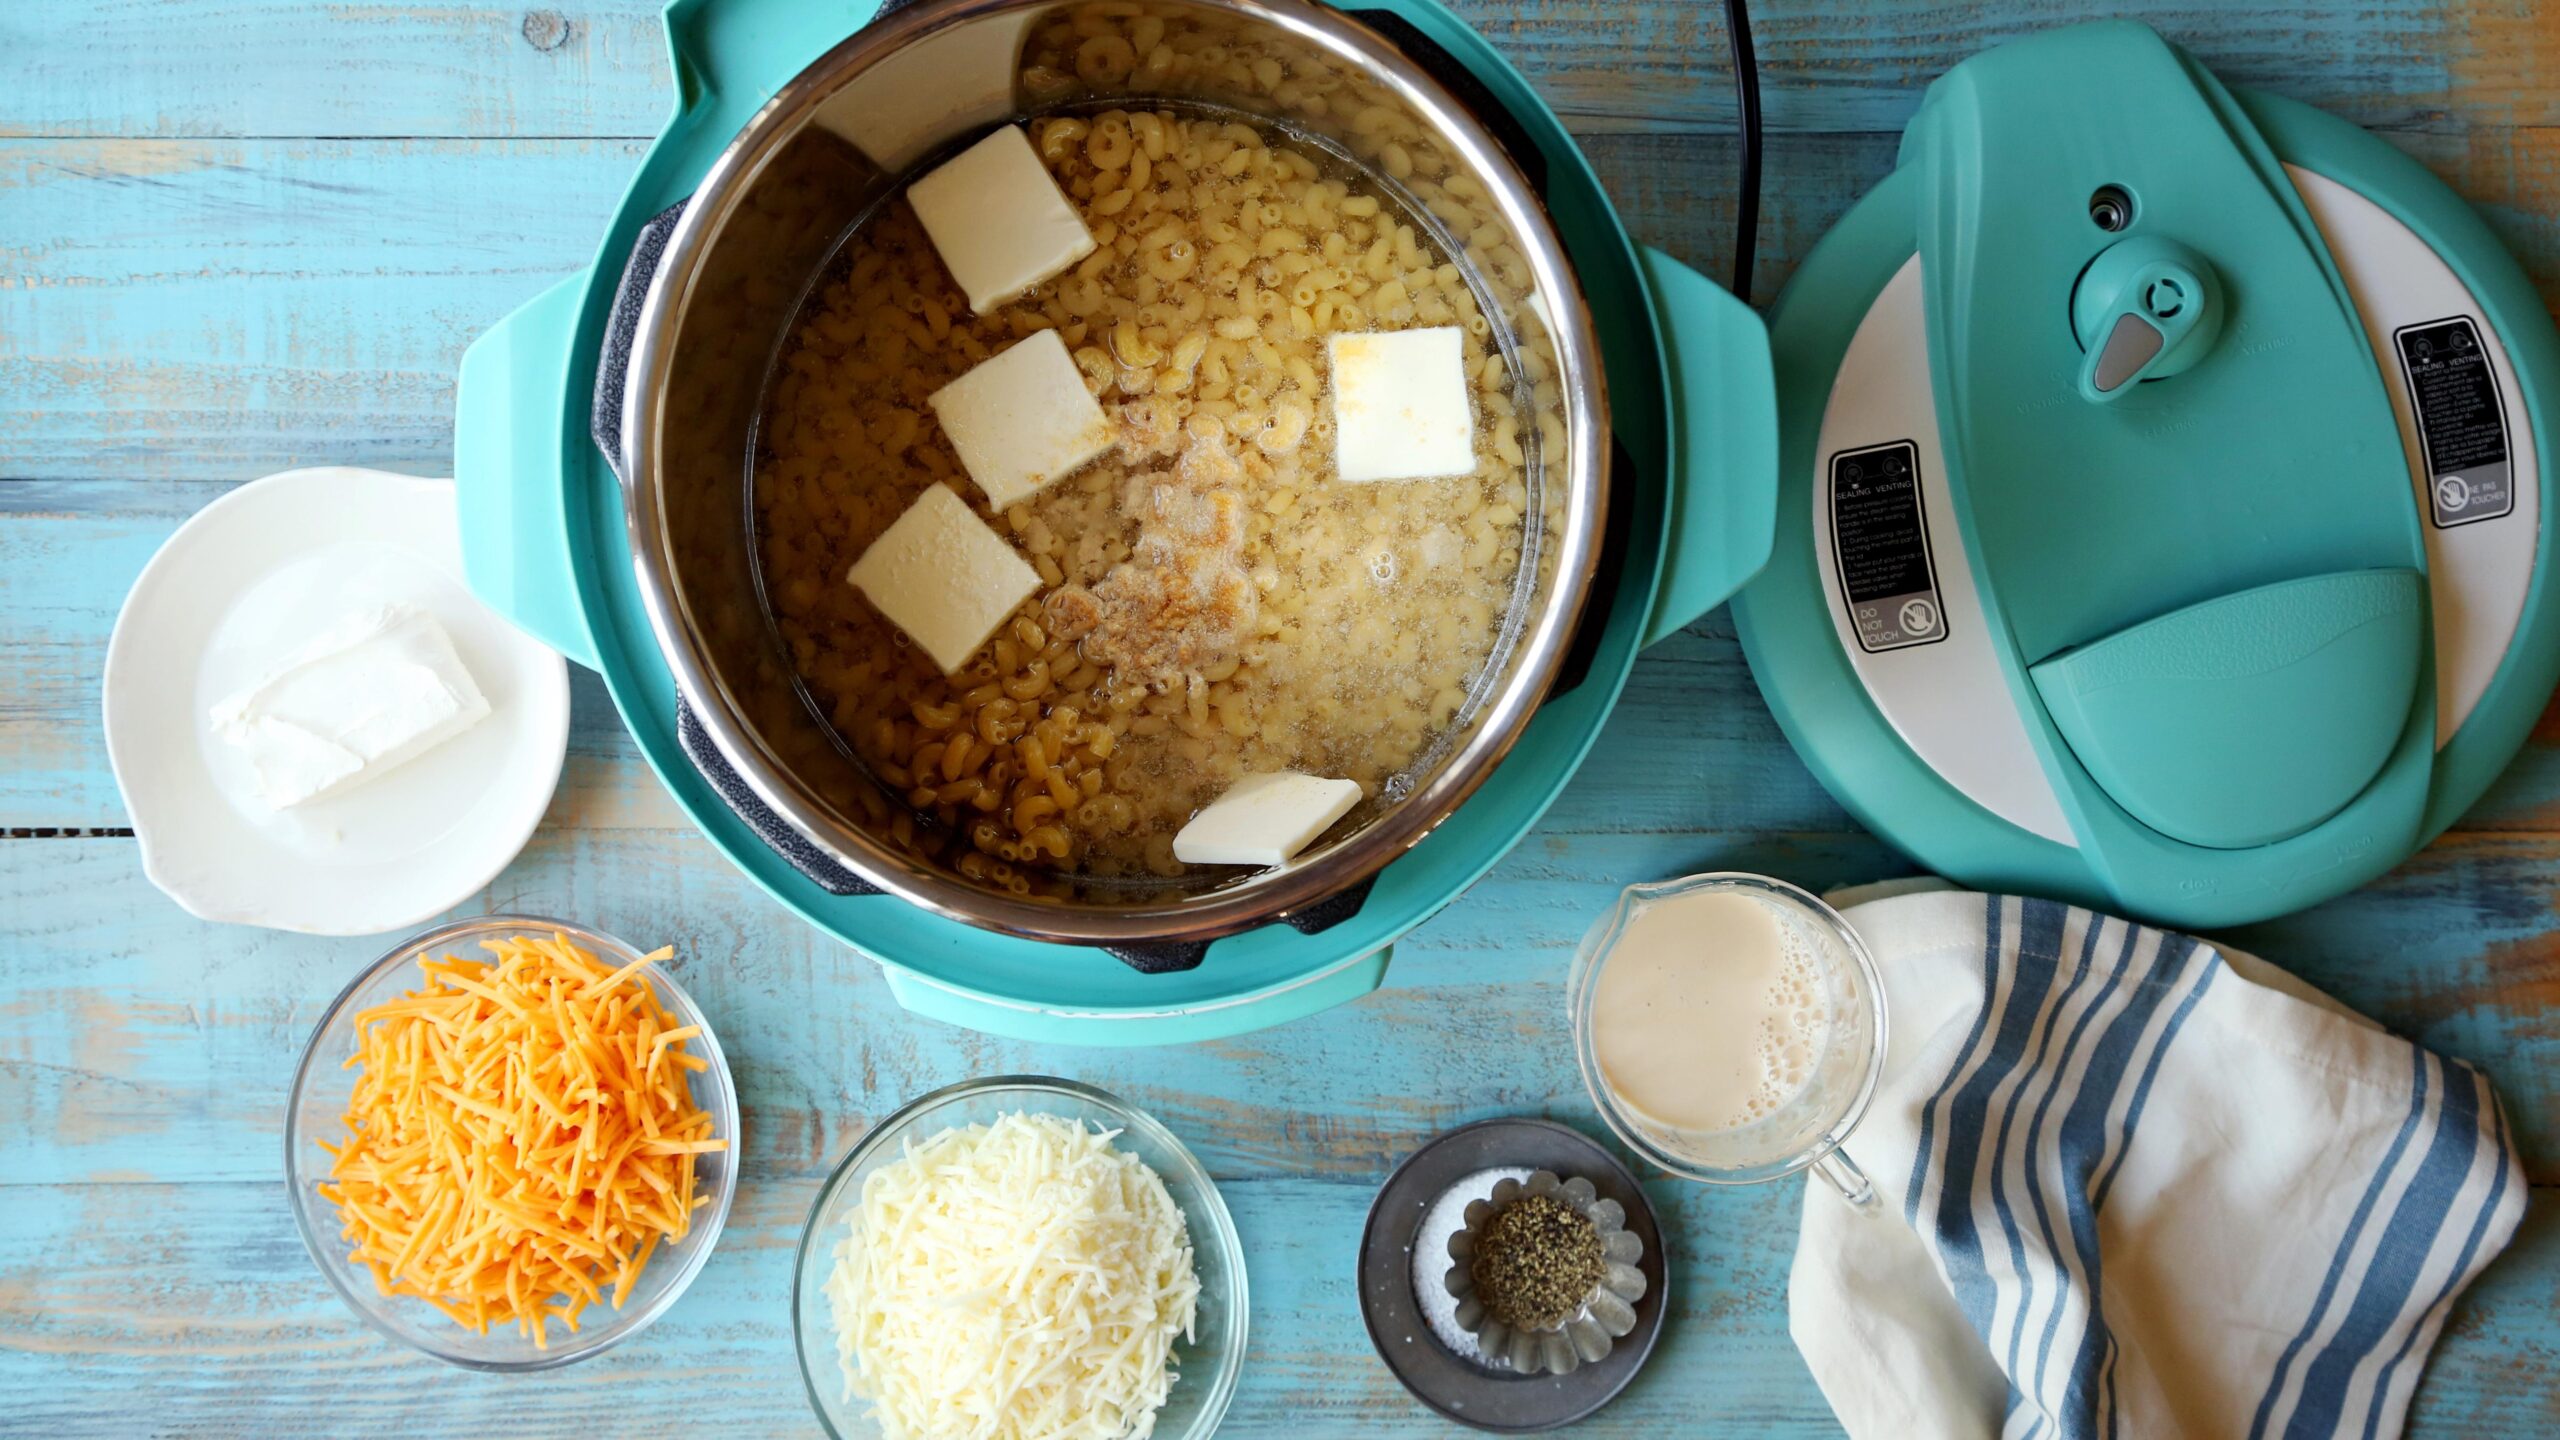  You won’t believe how easy it is to make this homemade mac & cheese in just minutes.